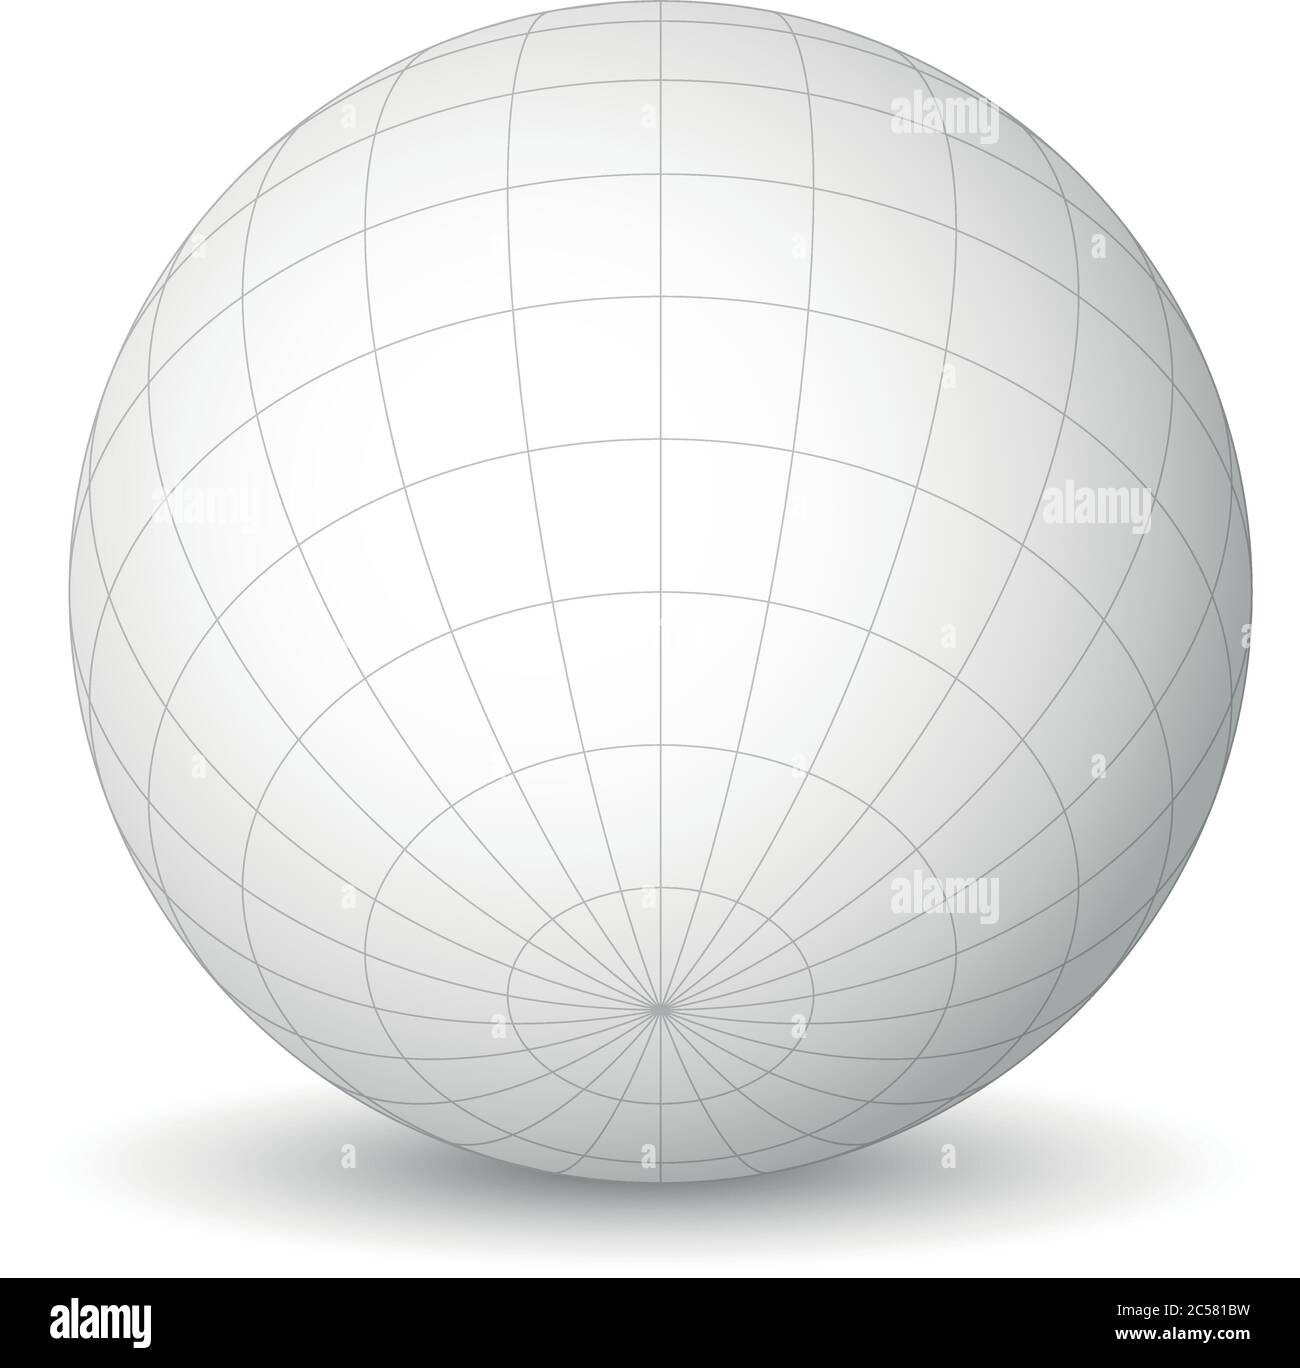 Blank planet Earth white globe with grid of meridians and parallels, or latitude and longitude. 3D vector illustration. Stock Vector